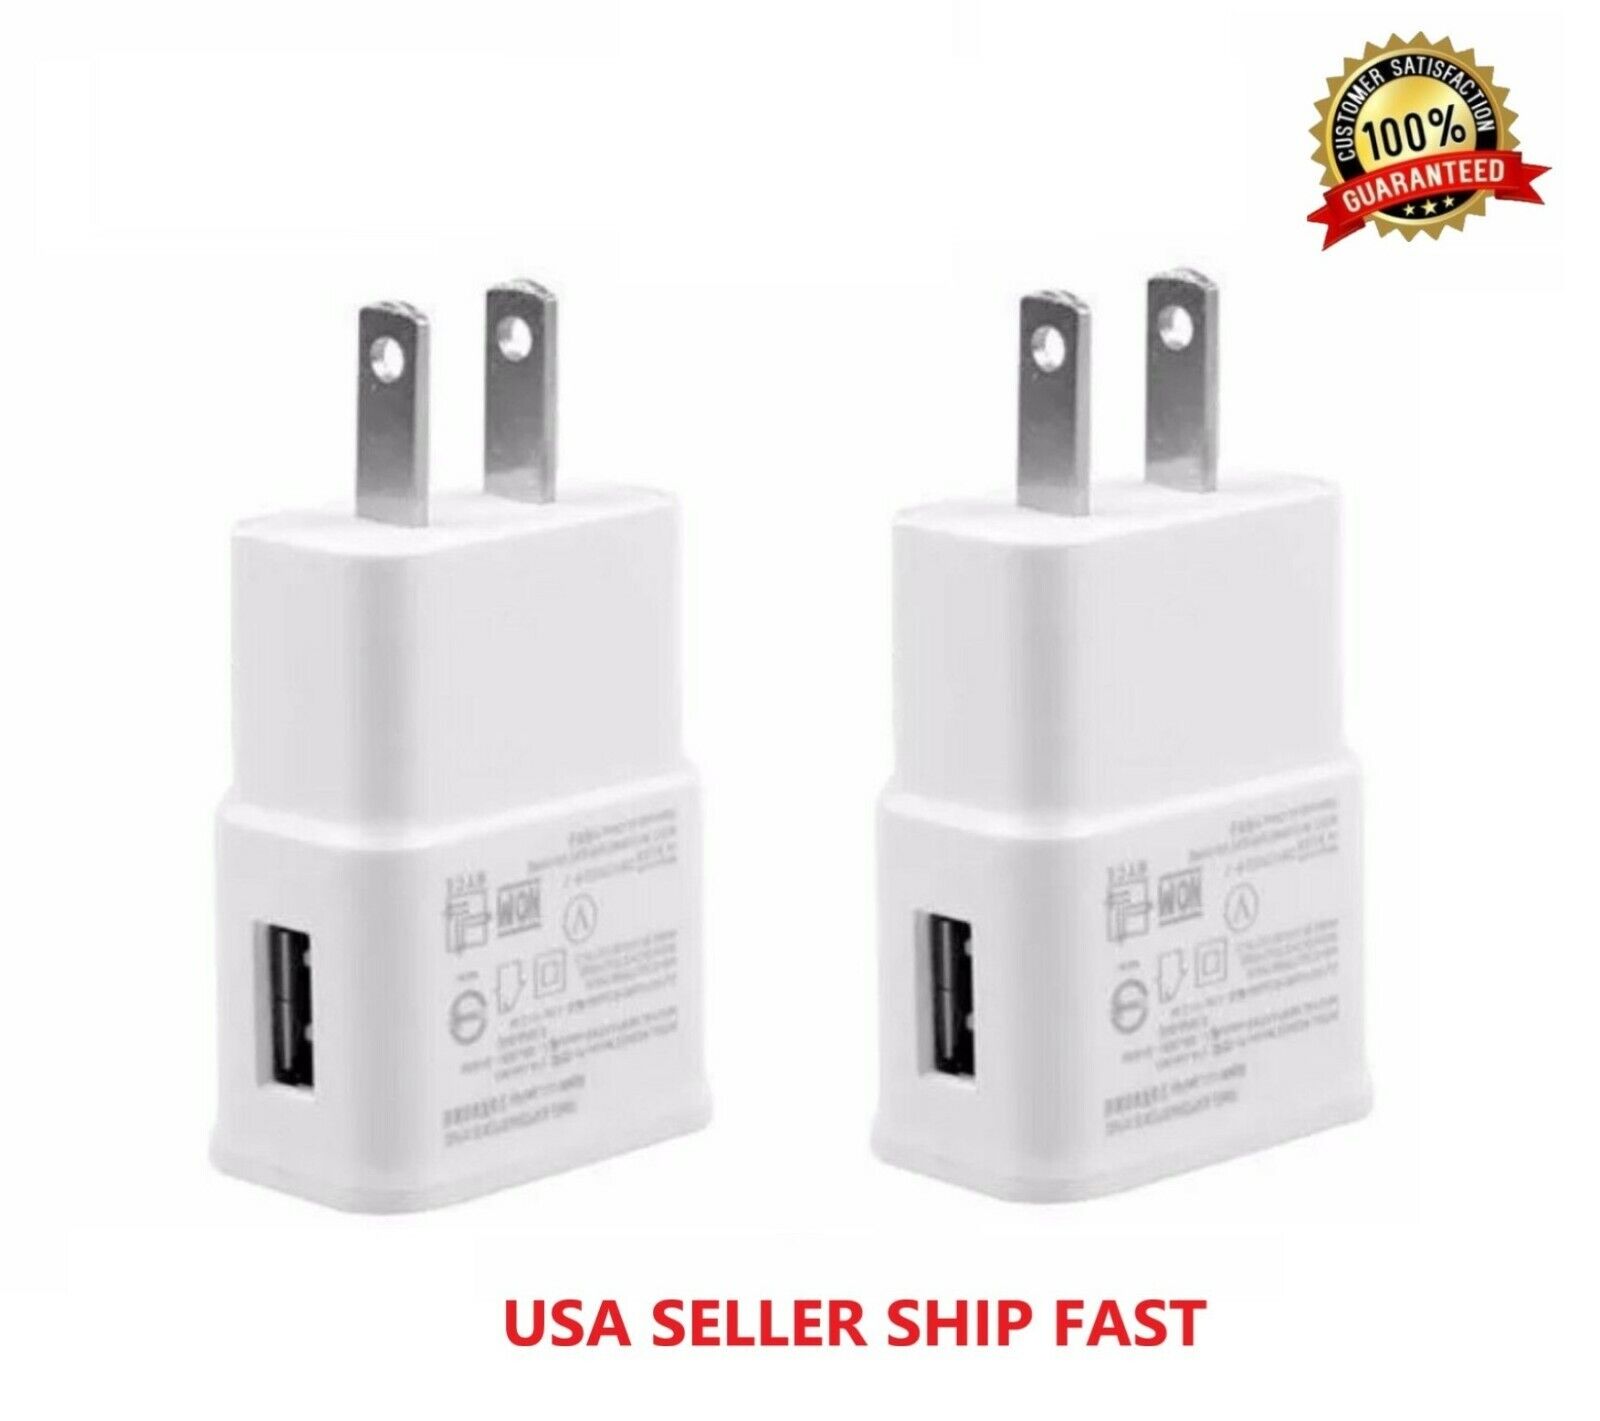 2-Pack 2AMP USB POWER ADAPTER WALL CHARGER For Universal SAMSUNG LG iPHONE Unbranded/Generic Does Not Apply